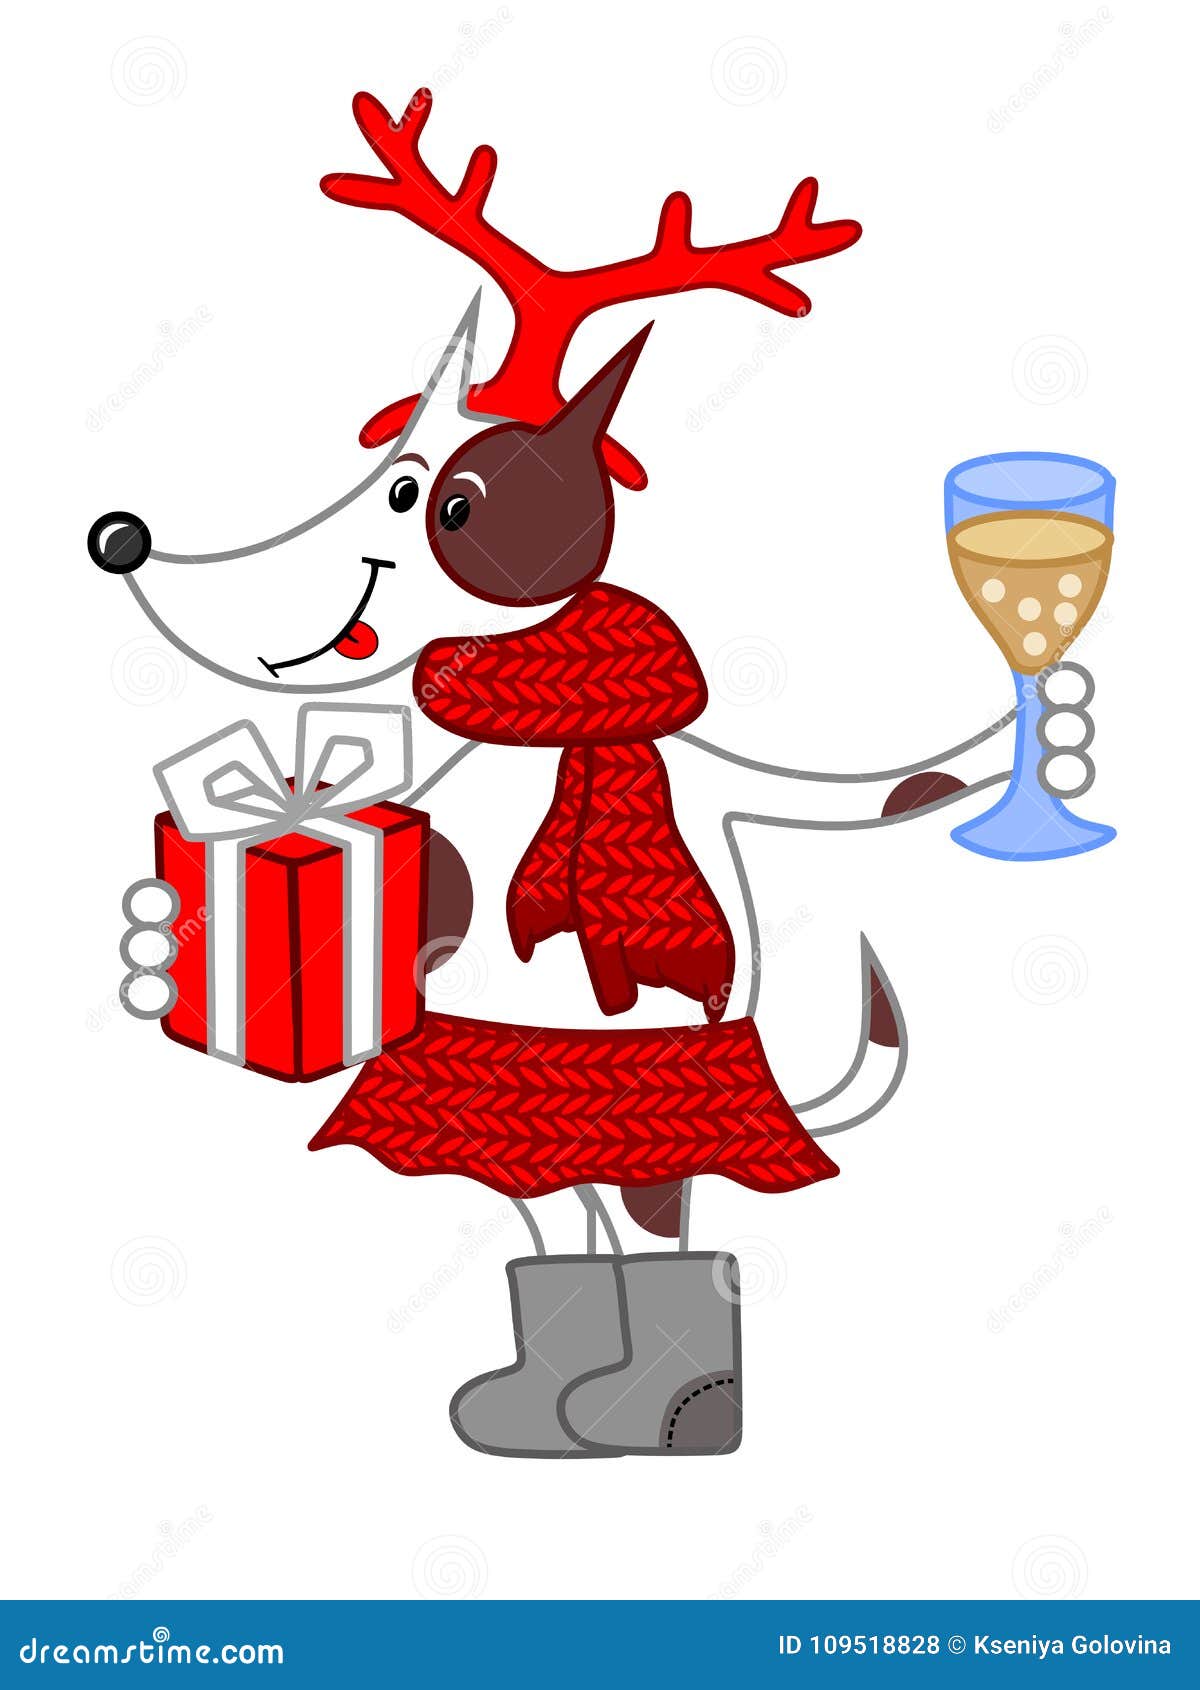 Christmas dog with gift stock vector. Illustration of character - 109518828